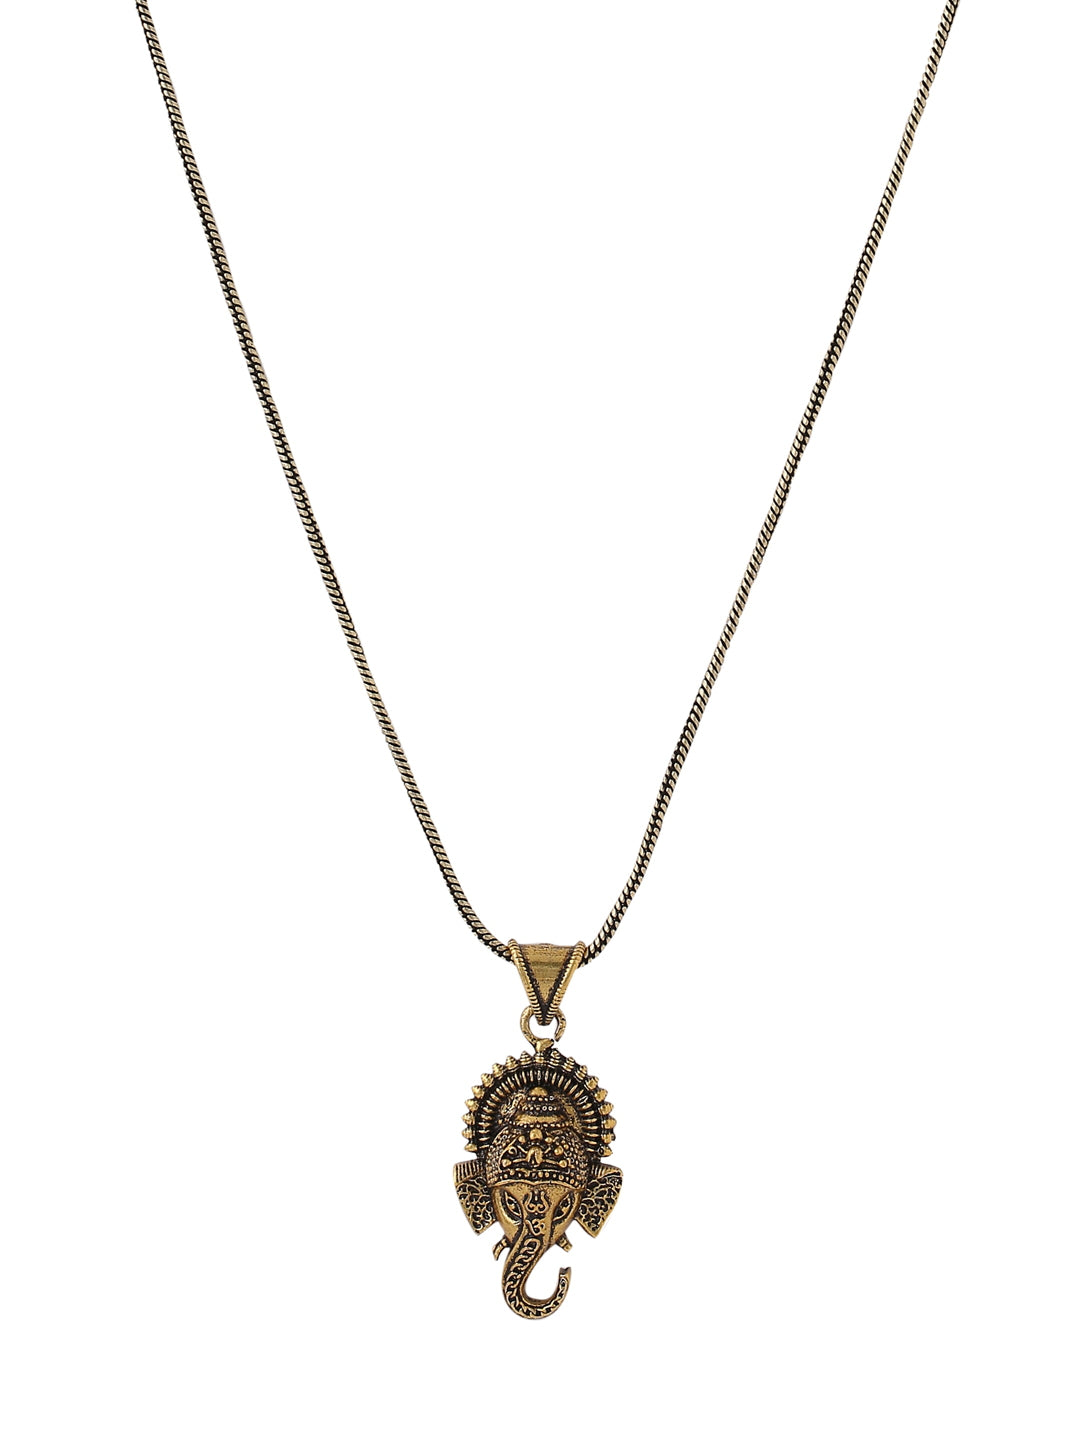 Antique Gold Plated Lord Ganesh Pendant with Chain-Viraasi